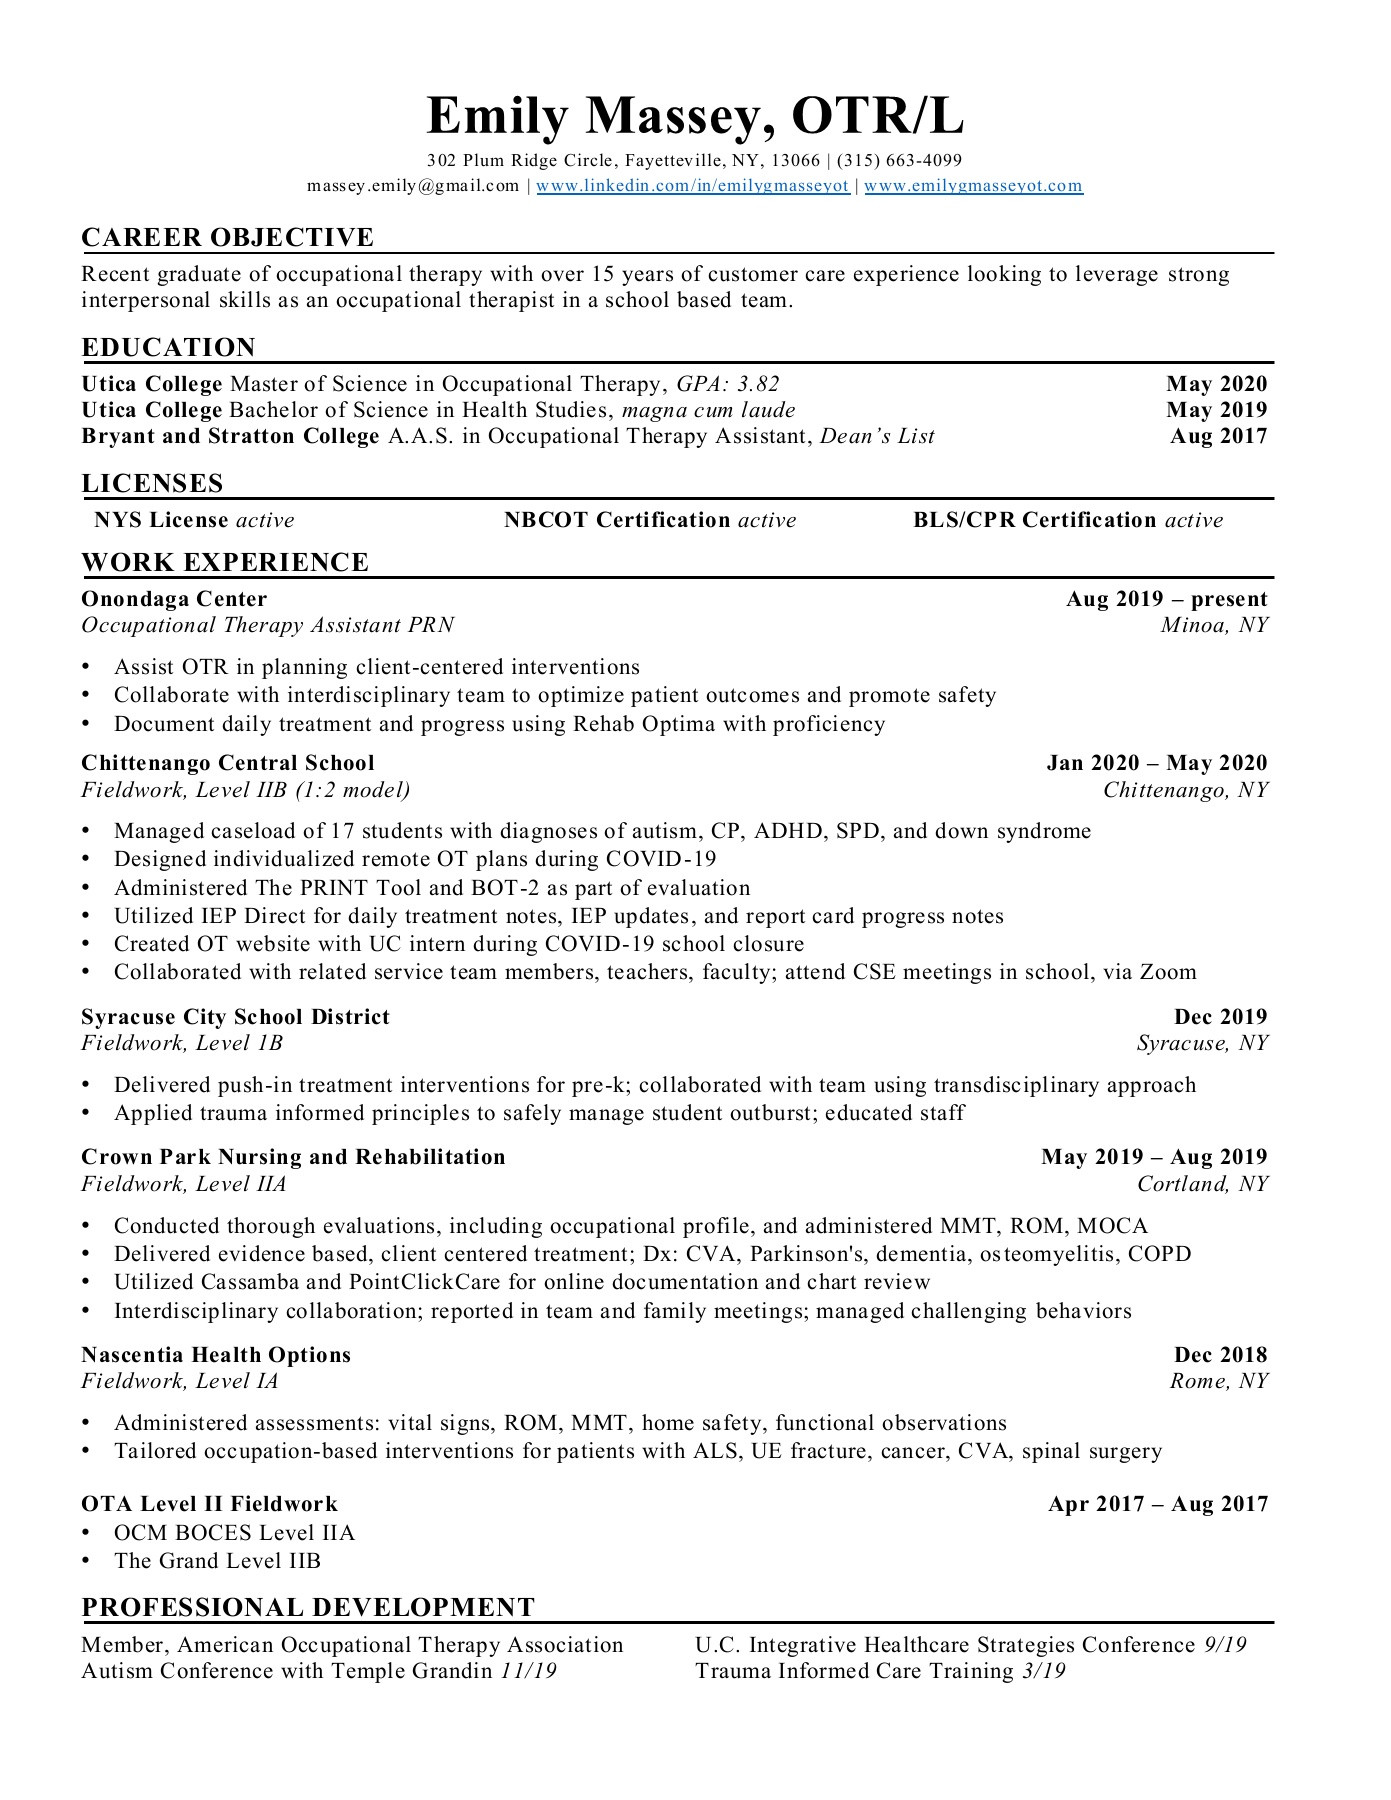 Prn Occupational therapy assistant Resume Sample Resume – Flip Ebook Pages 1-1 Anyflip